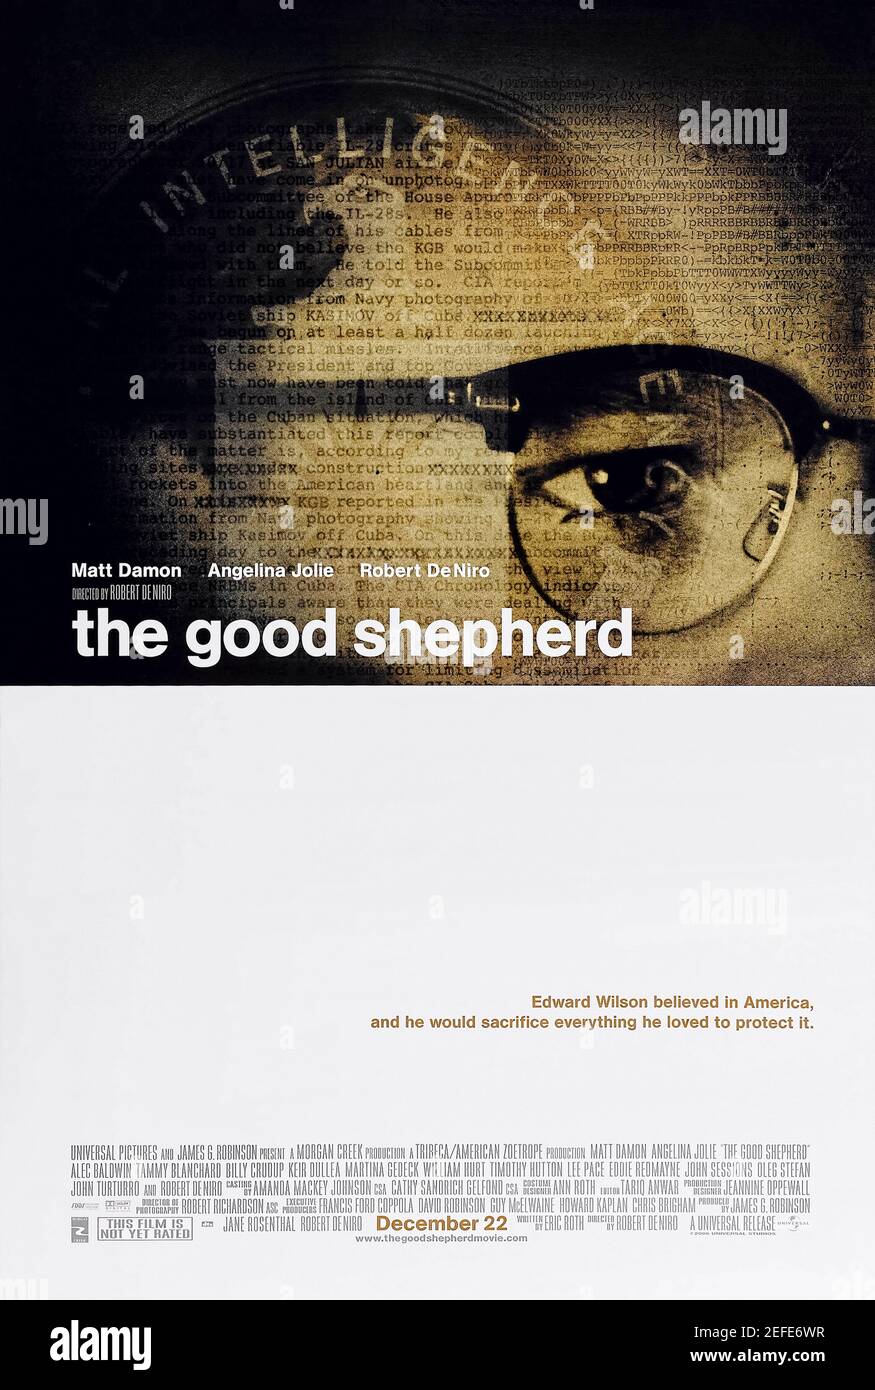 The Good Shepherd (2006) directed by Robert De Niro and starring Matt Damon, Angelina Jolie and Robert De Niro. The tumultuous early history of the CIA is viewed through the prism of one agent's life. Stock Photo